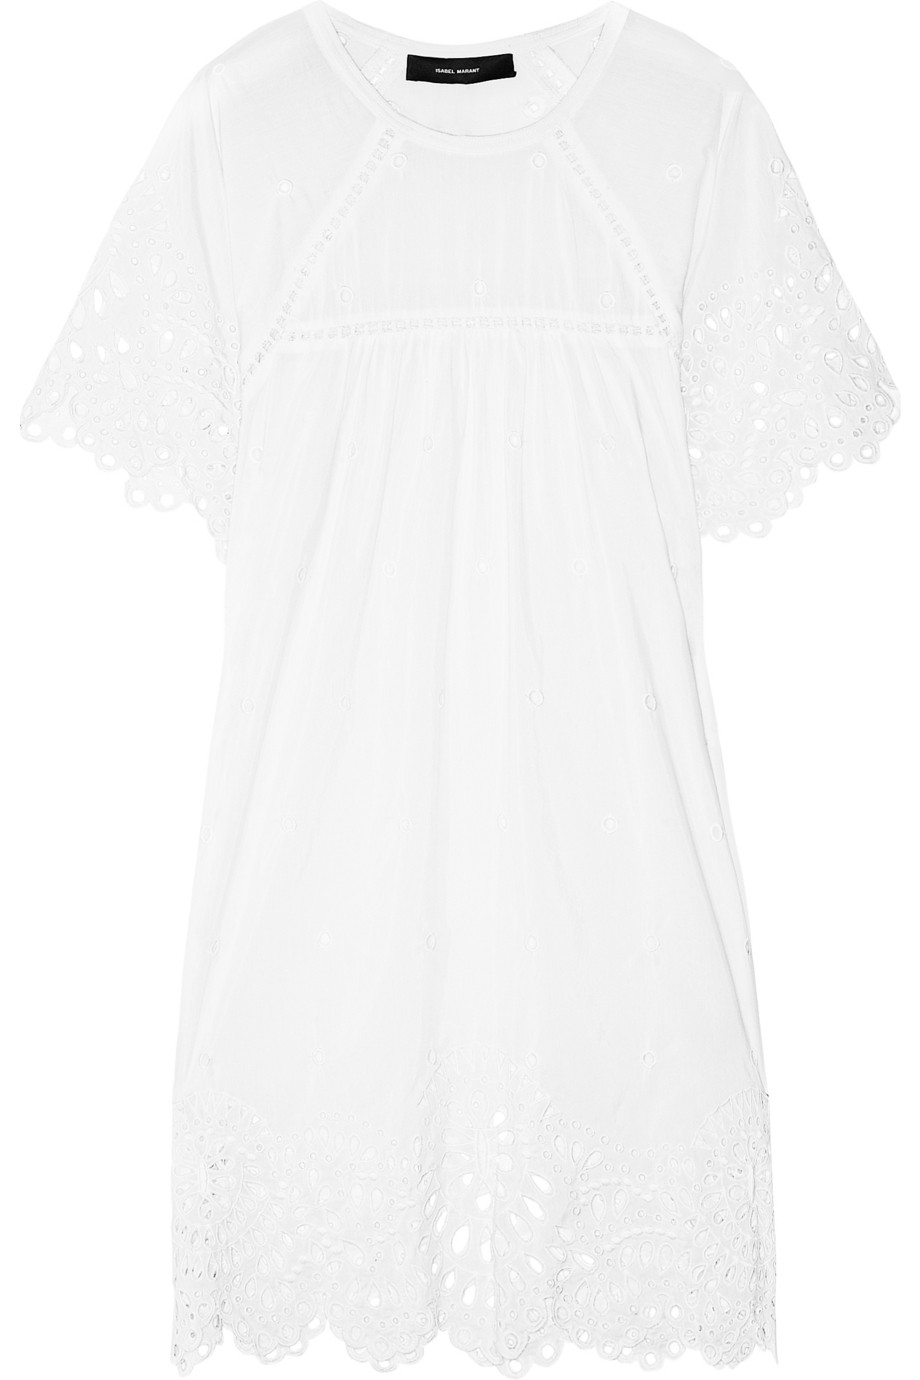 Lyst - Isabel Marant Dune Broderie Anglaise Cotton-blend Dress in White